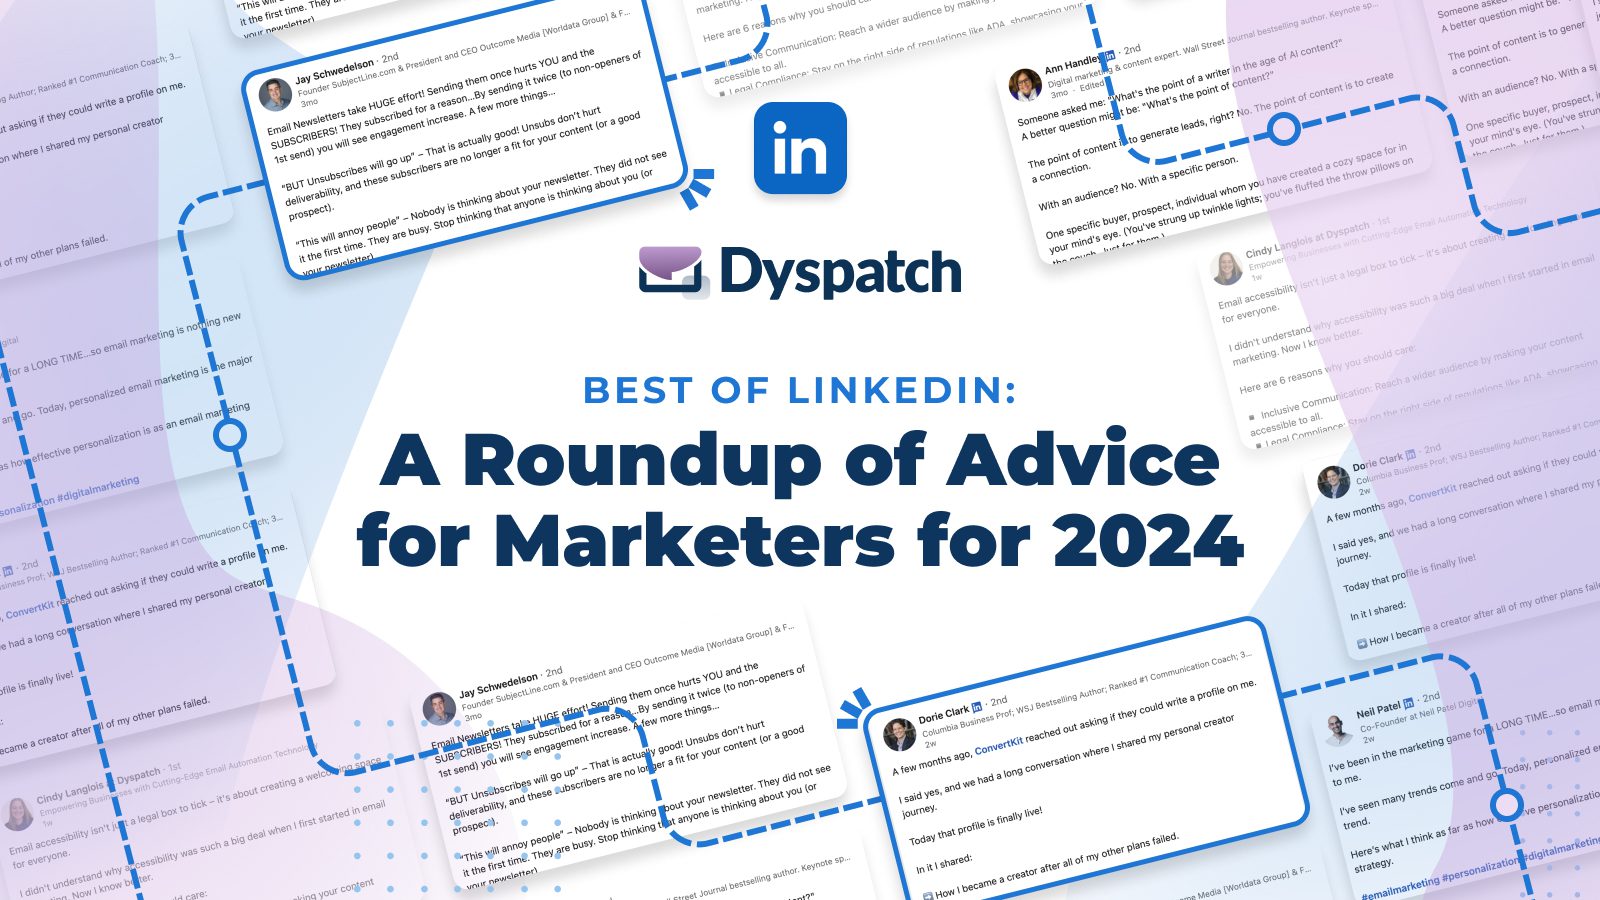 A Roundup of Advice for Marketers for 2024